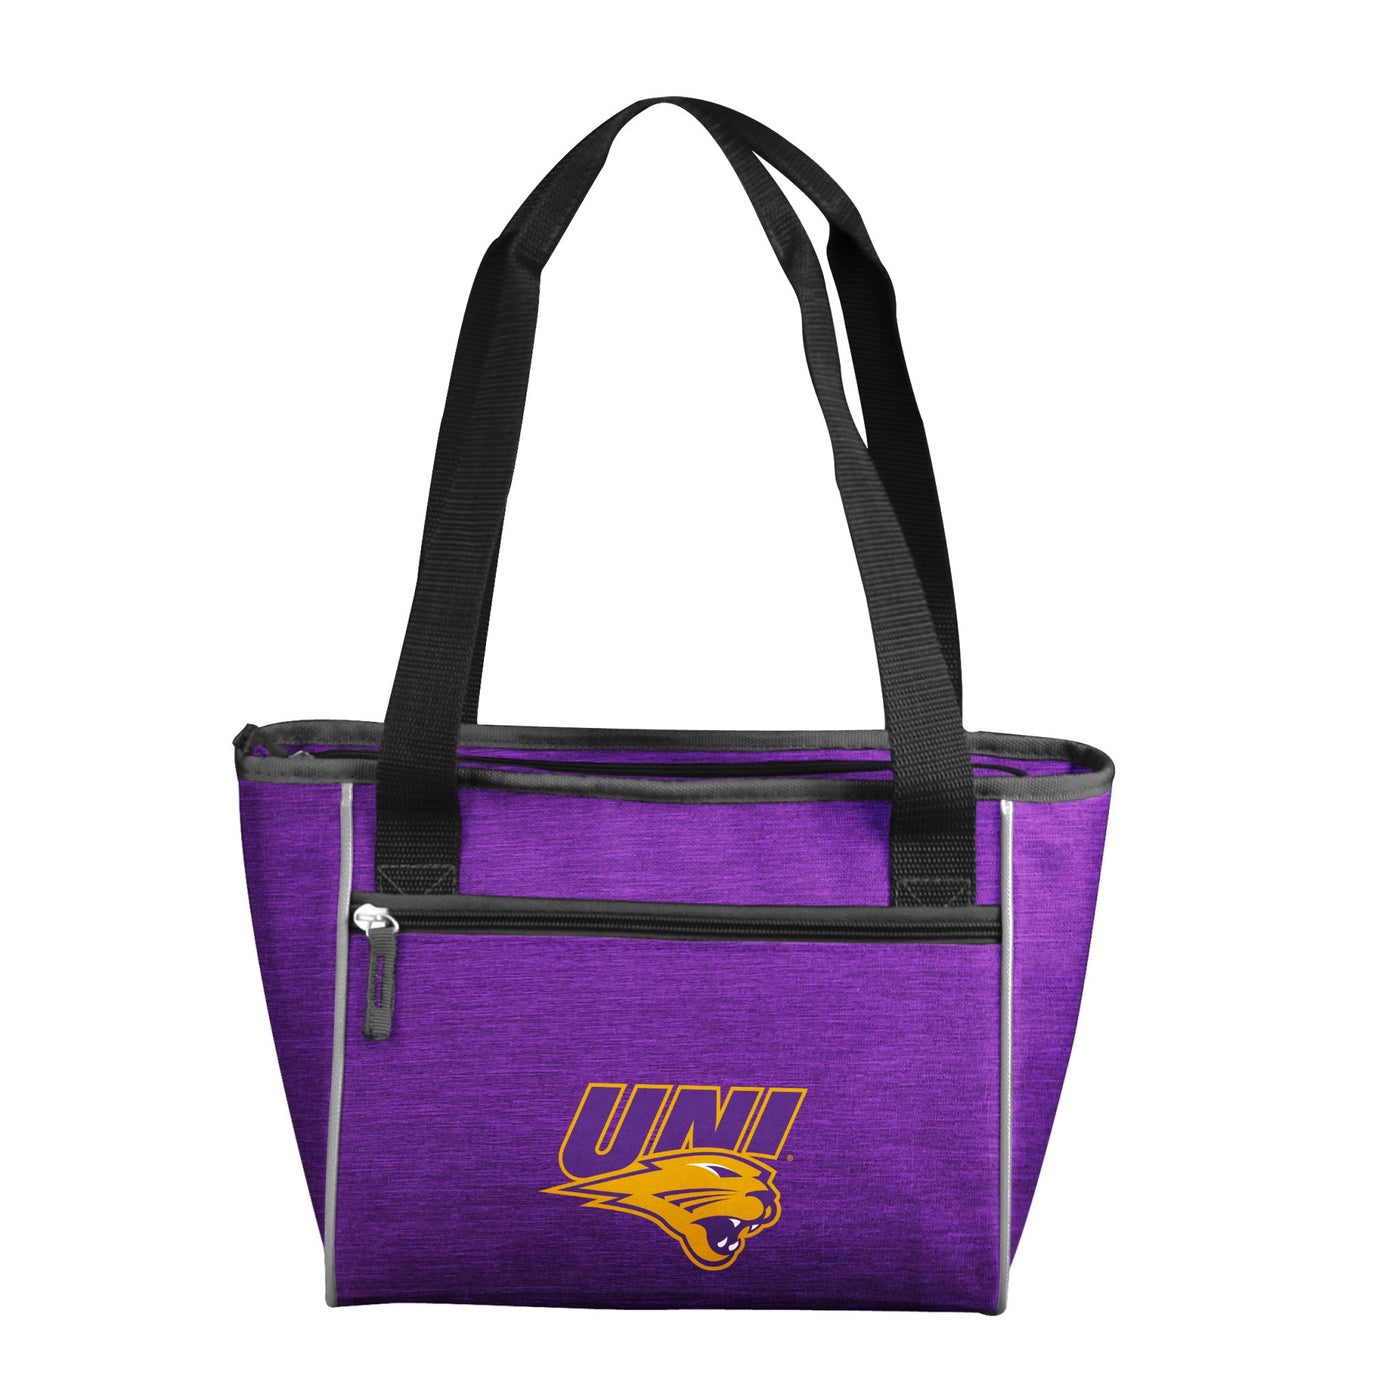 Northern Iowa Crosshatch 16 Can Cooler Tote - Logo Brands